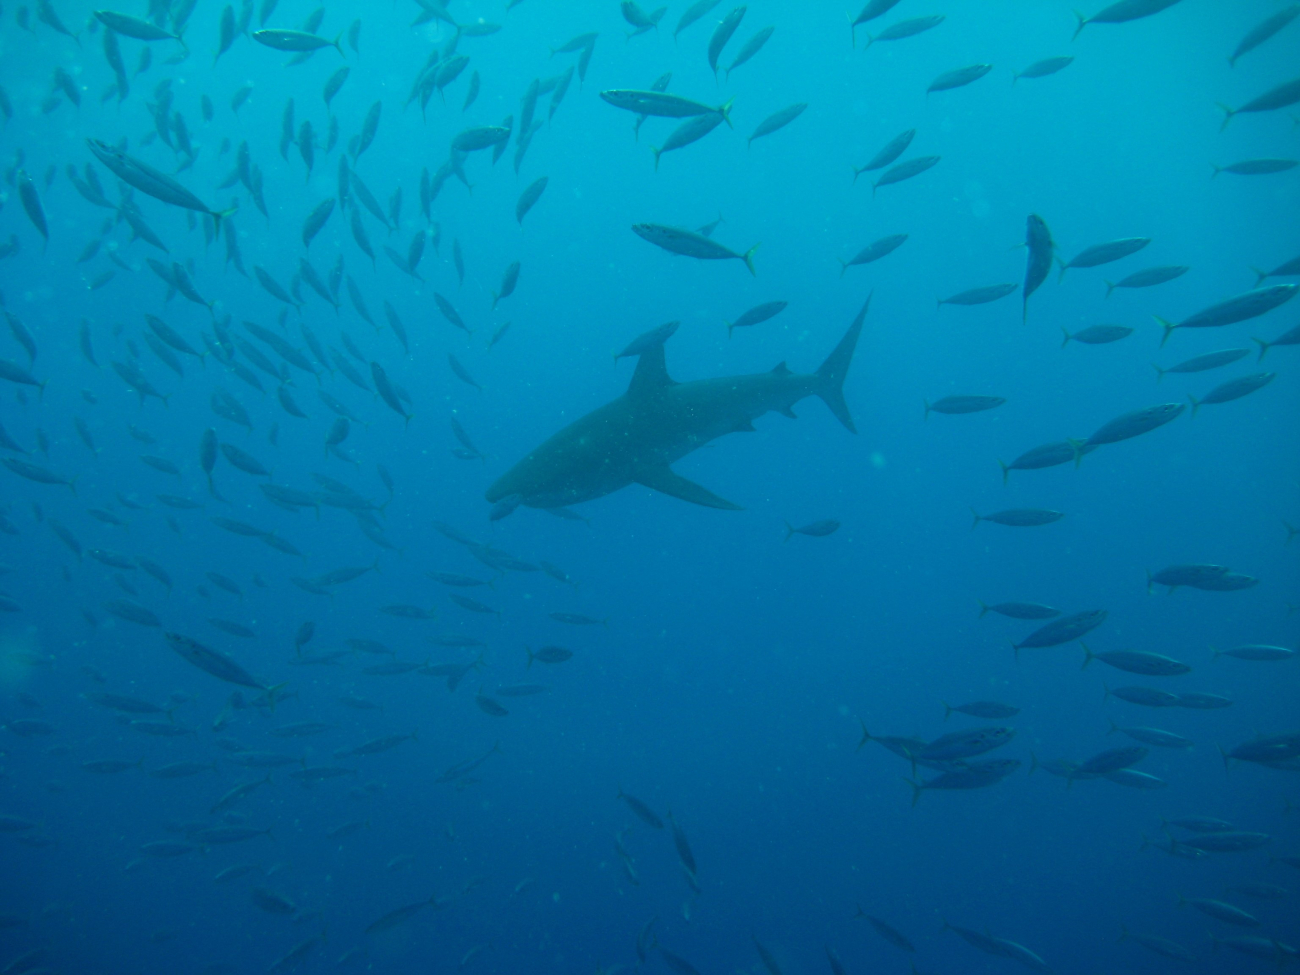 School of fusiliers disbursing as gray reef shark approaches